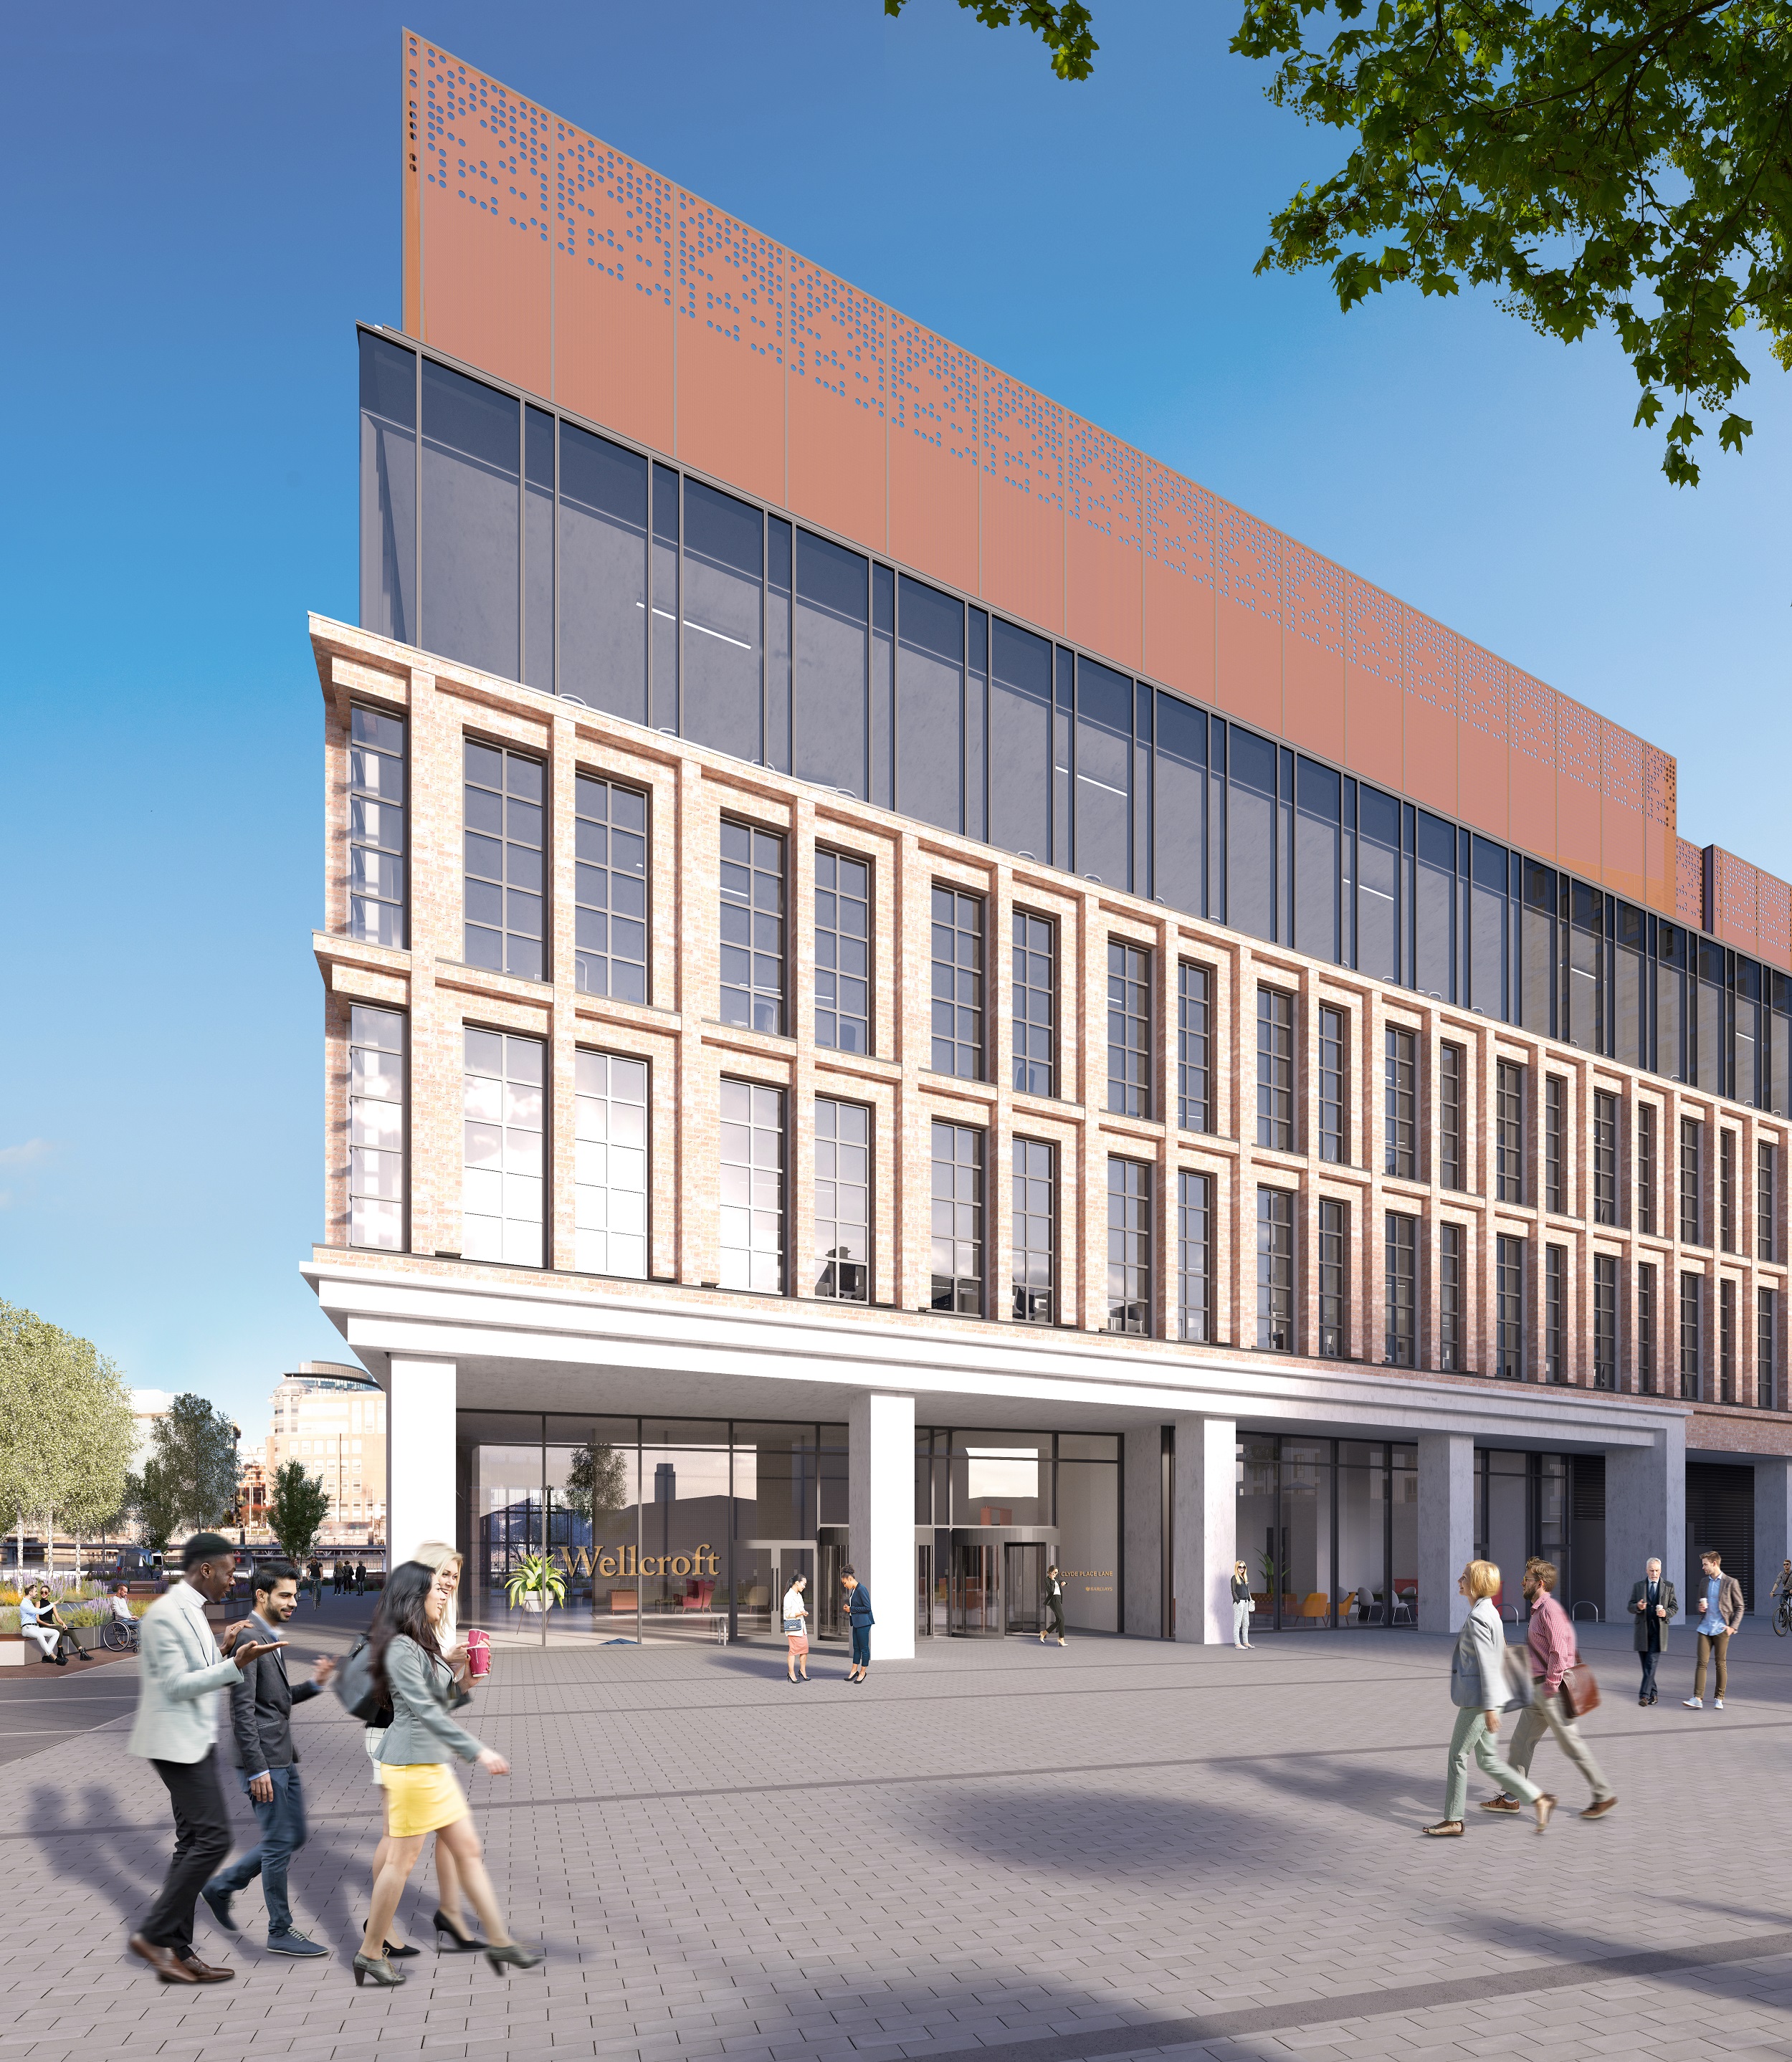 A render of the Wellcroft building.